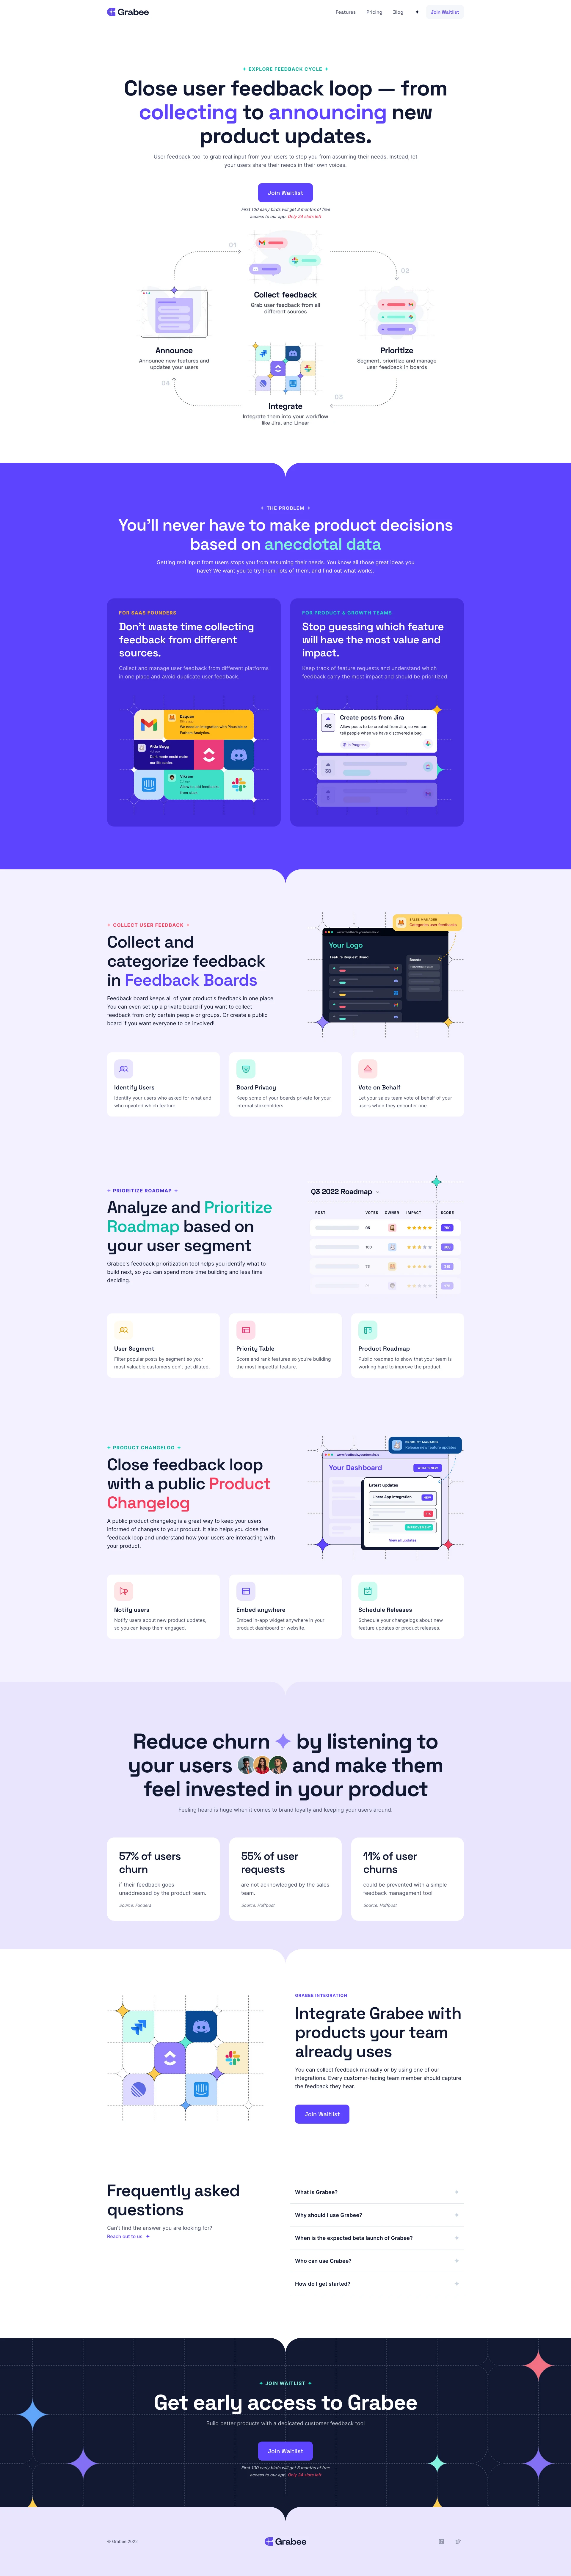 Grabee Landing Page Example: Grabee is a feedback management tool which helps you collect, manage and prioritize user feedback from different platforms and channels.